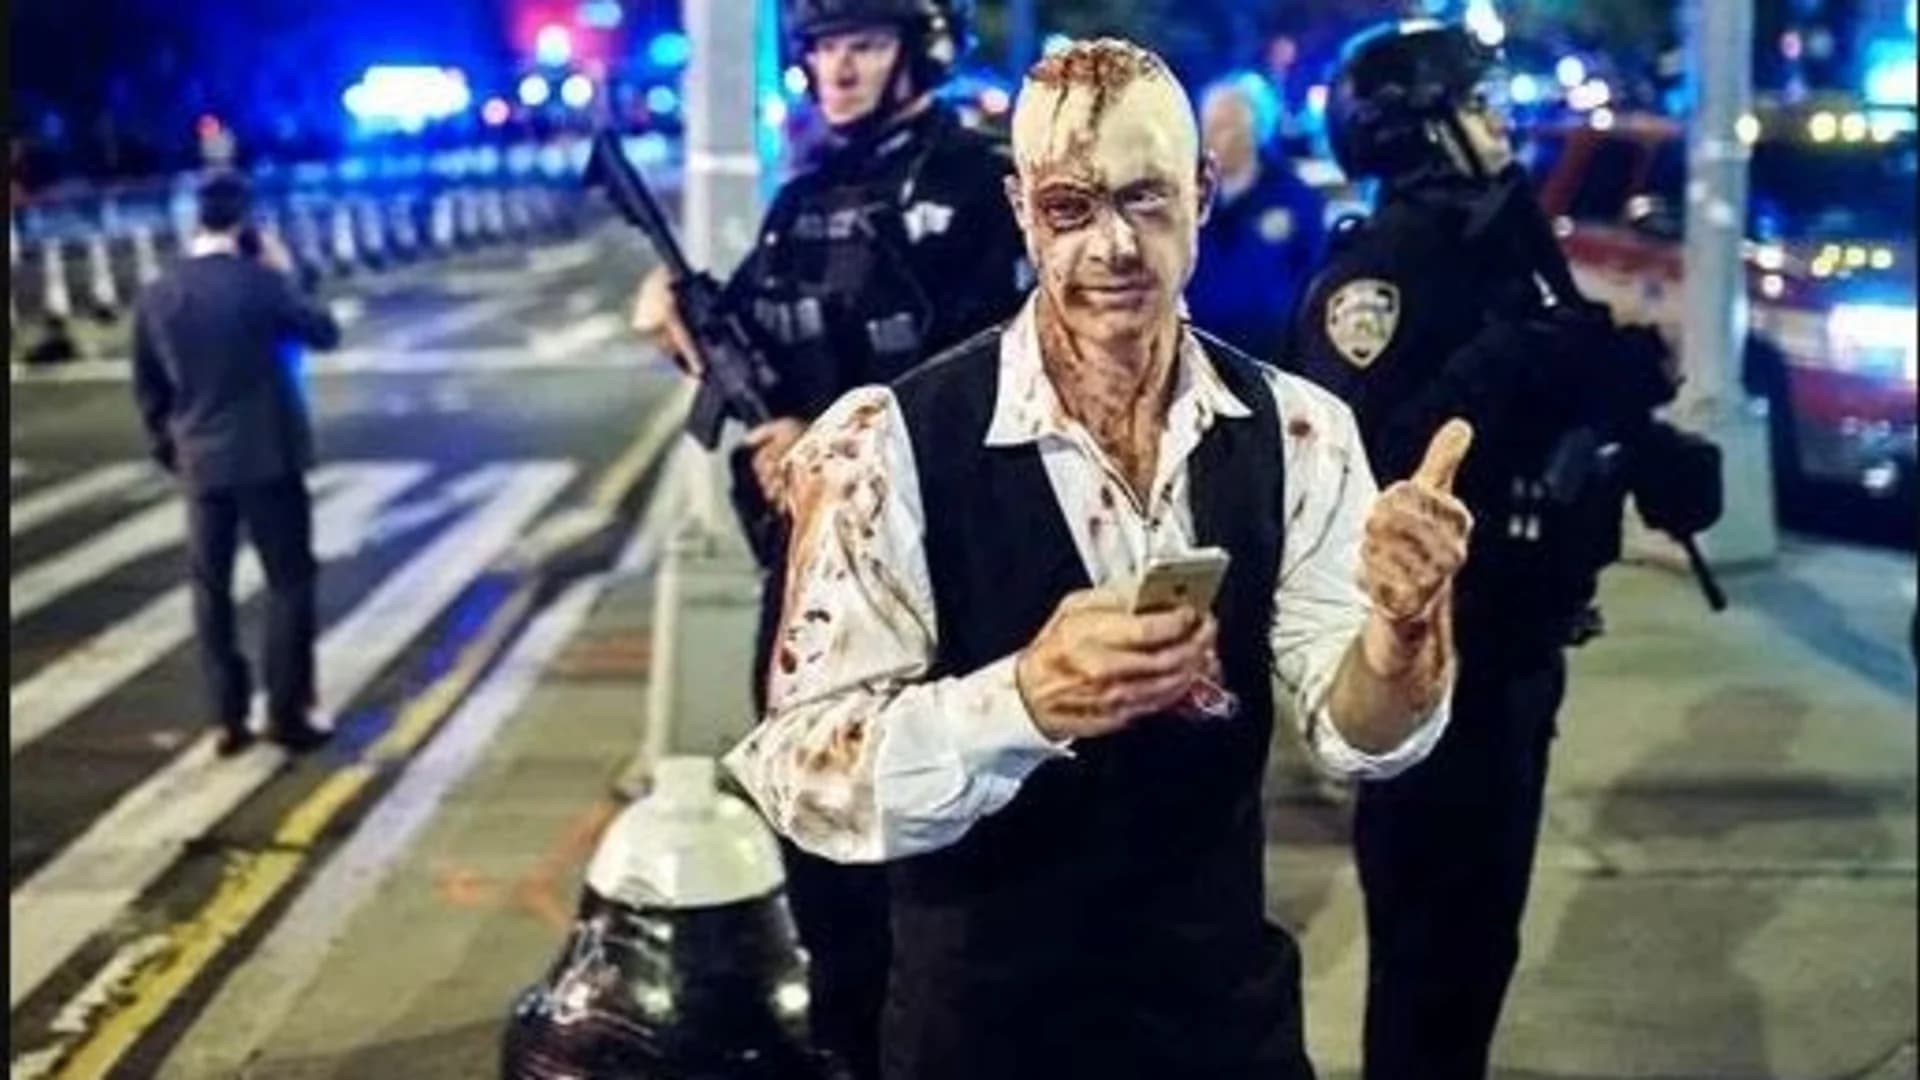 A year after attack, police out in force for NYC Halloween